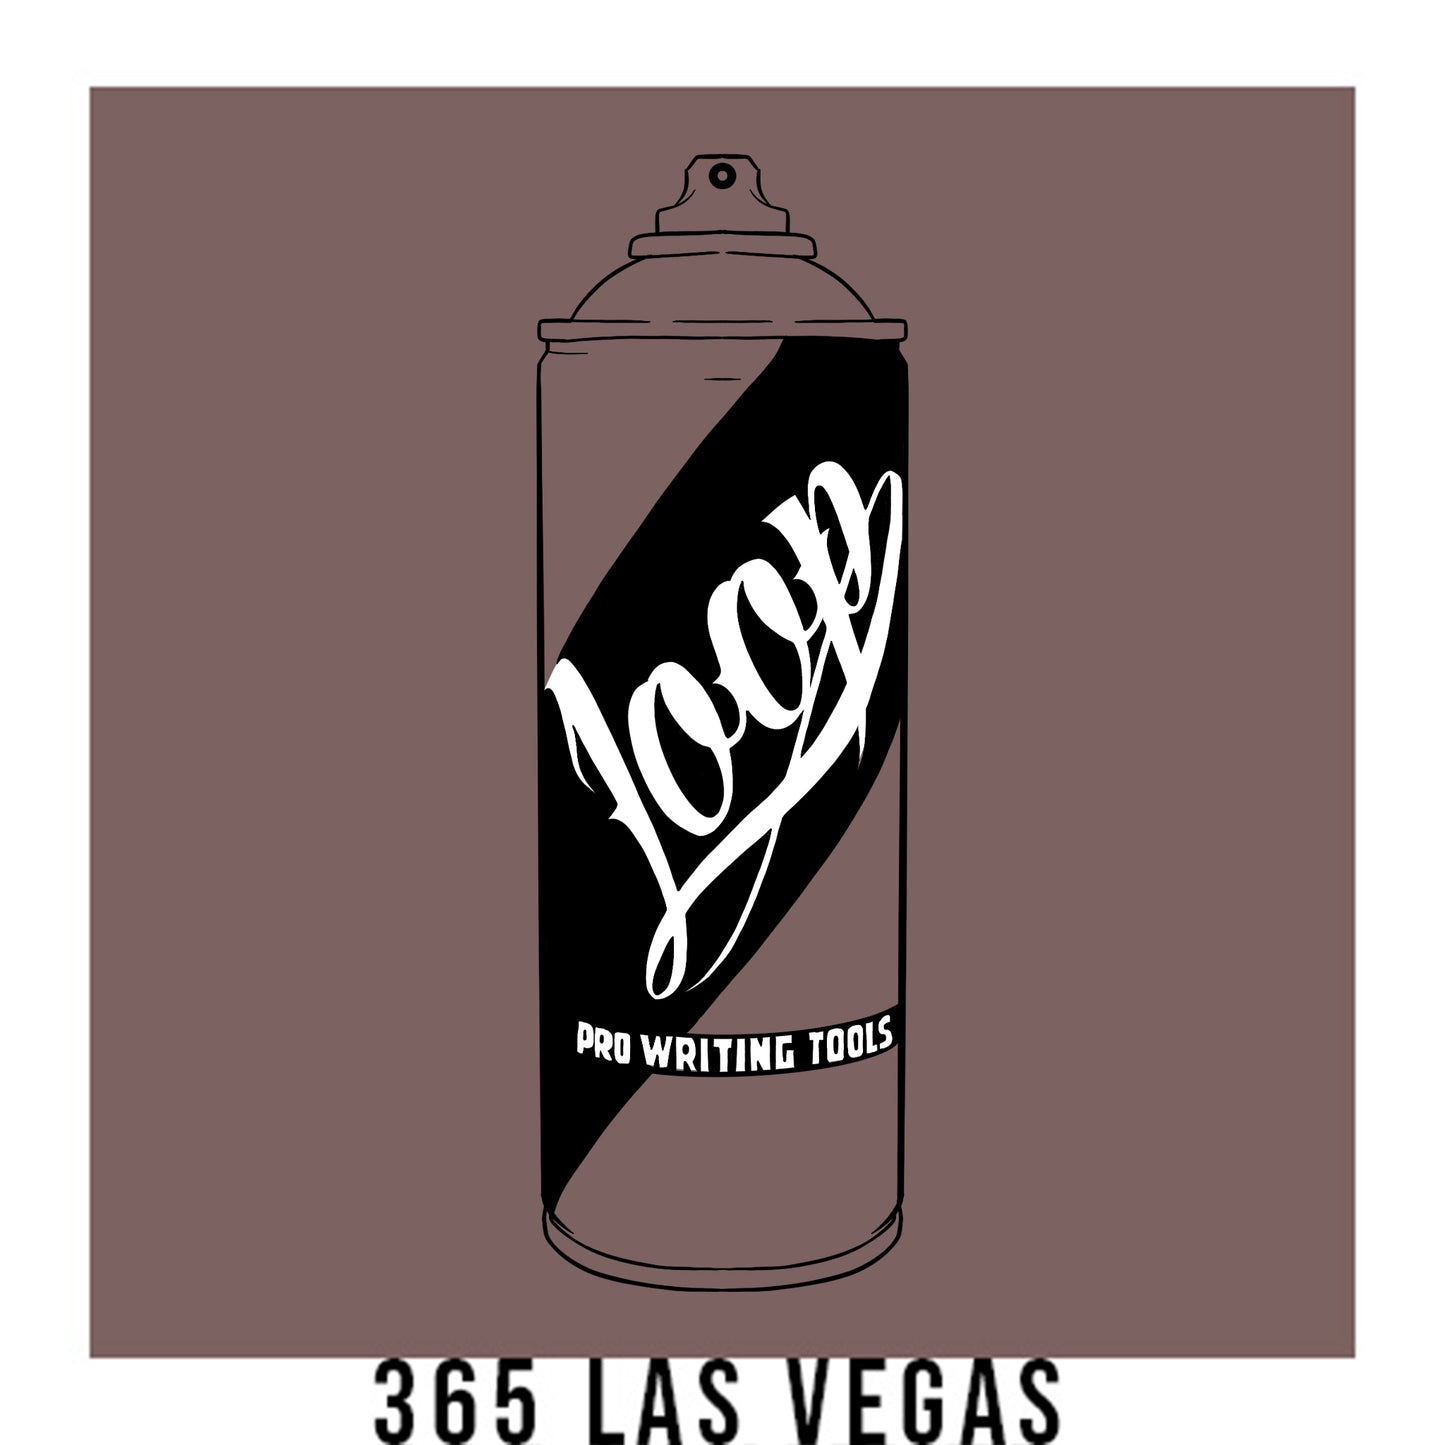 A black outline drawing of a coffee rose spray paint can with the word "Loop" written on the face in script. The background is a color swatch of the same coffee rose with a white border with the words "365 Las Vegas" at the bottom.